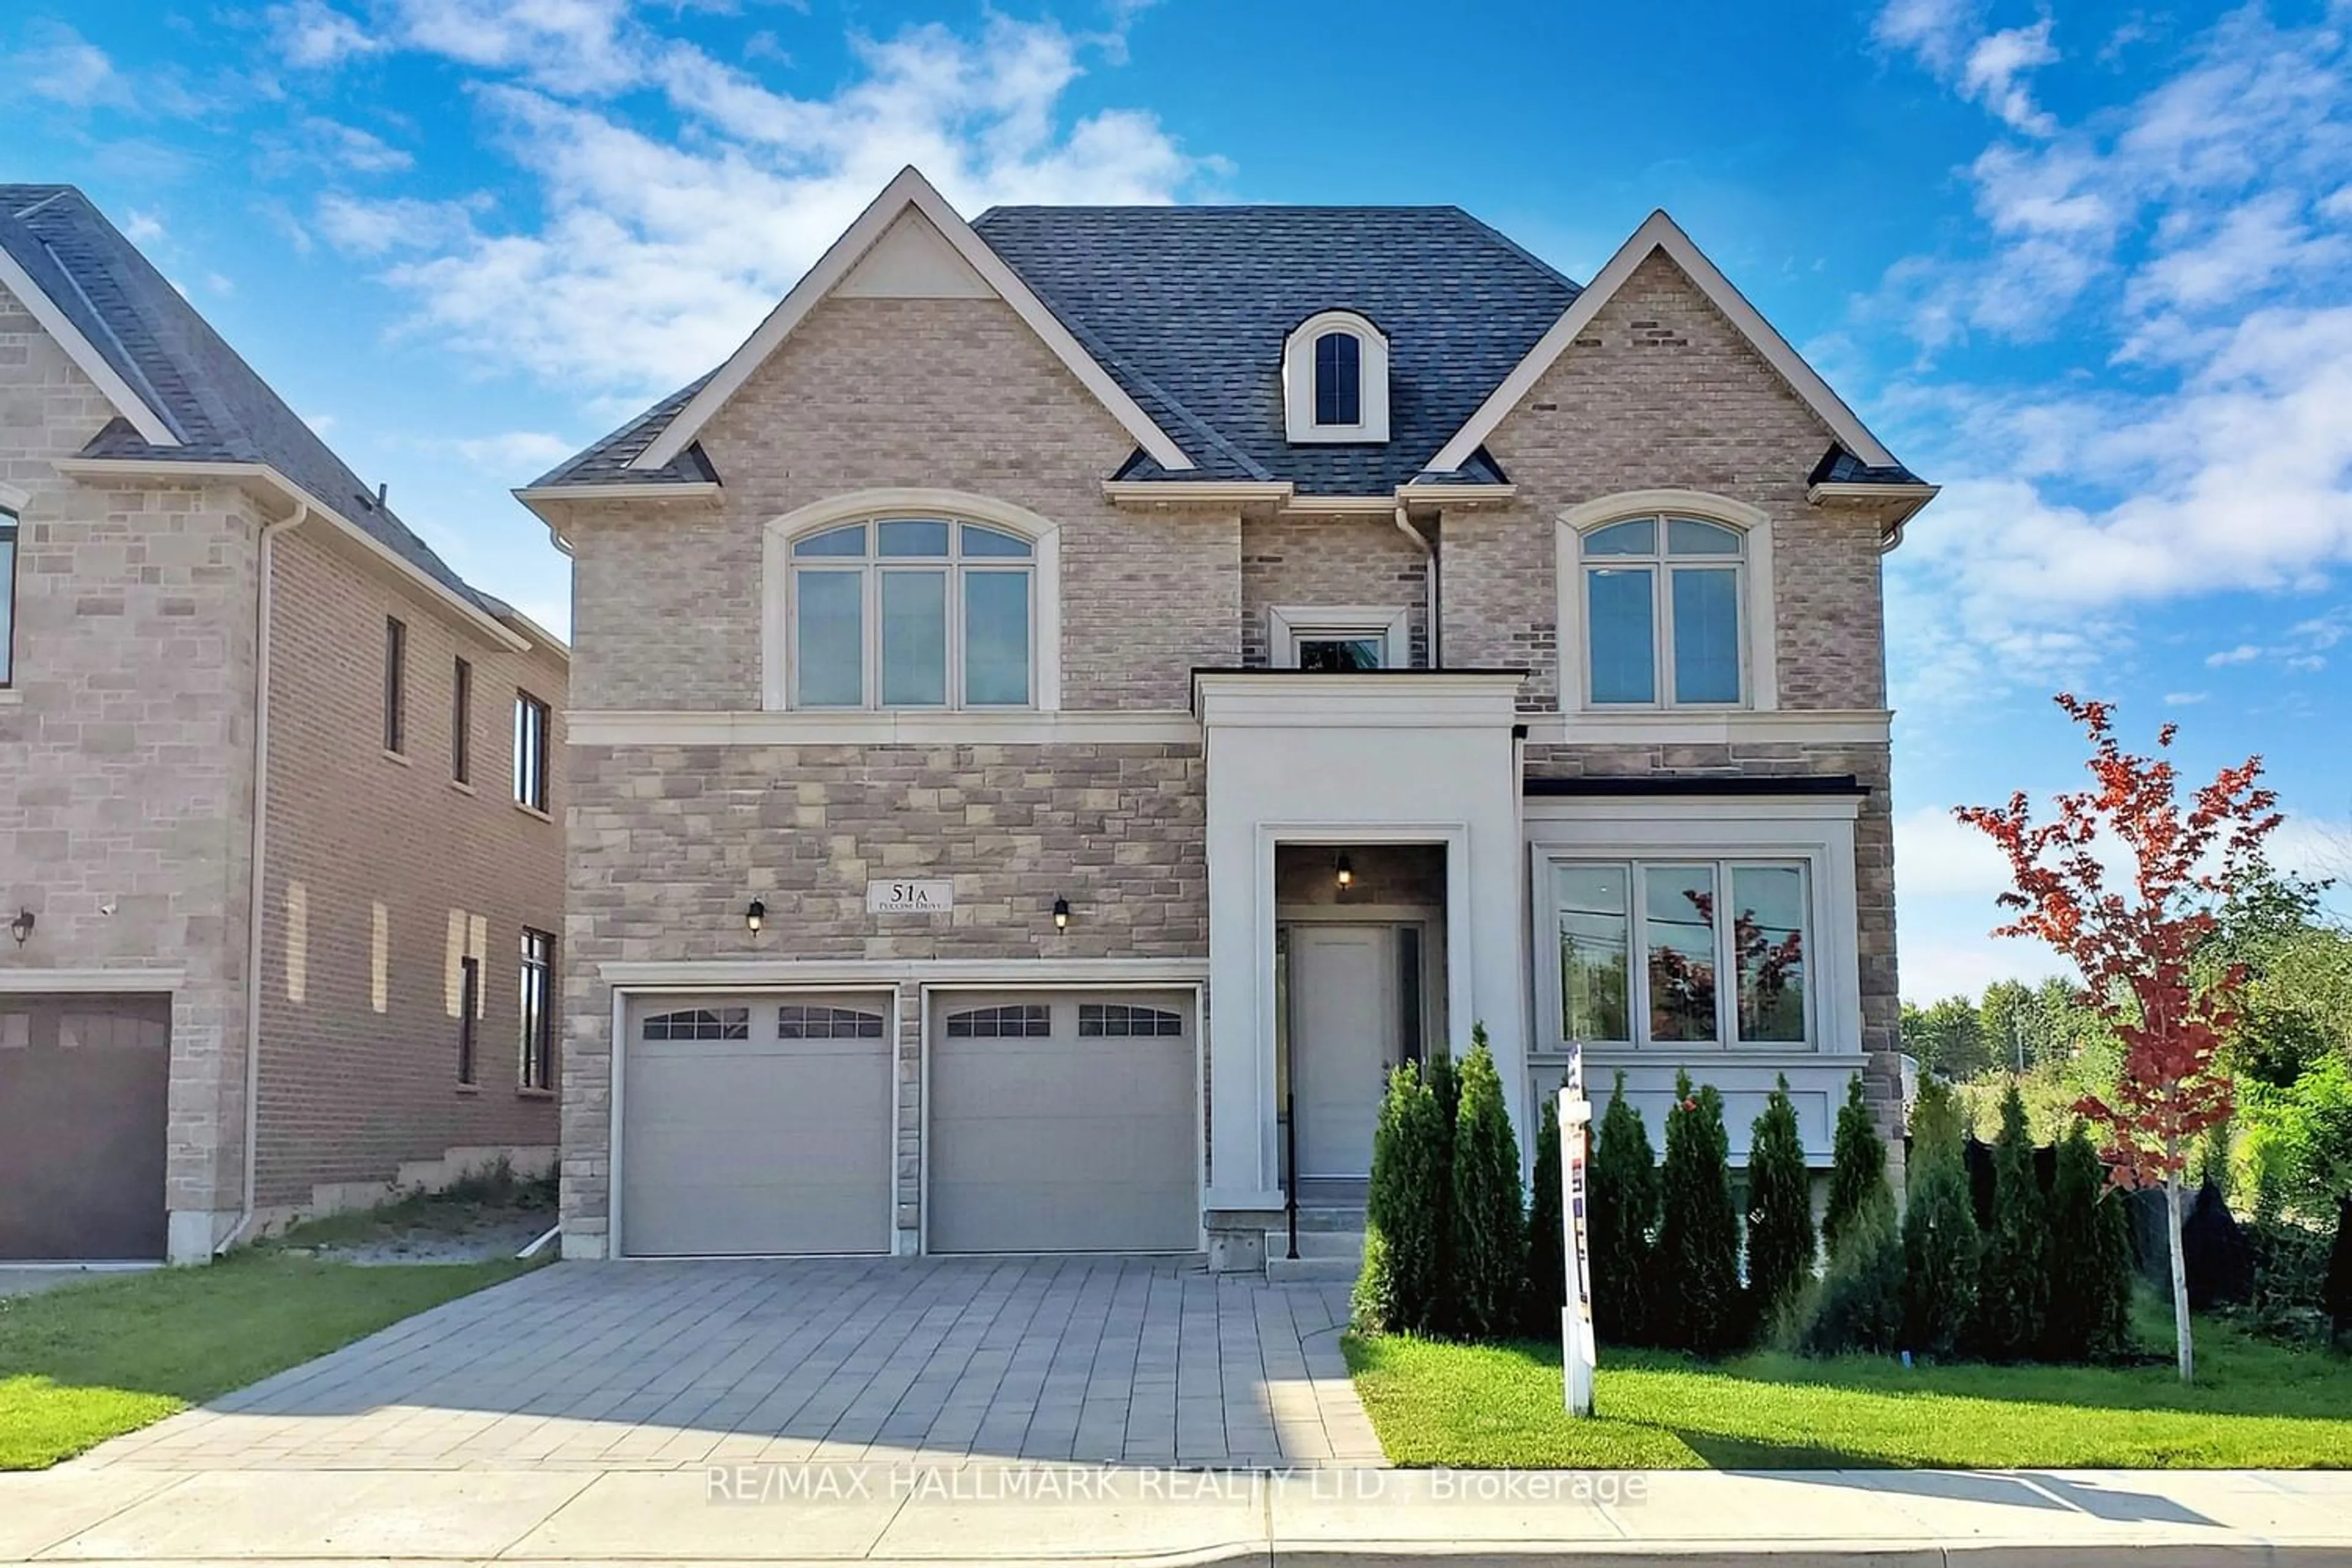 Home with brick exterior material for 51A Puccini Dr, Richmond Hill Ontario L4E 2Y6